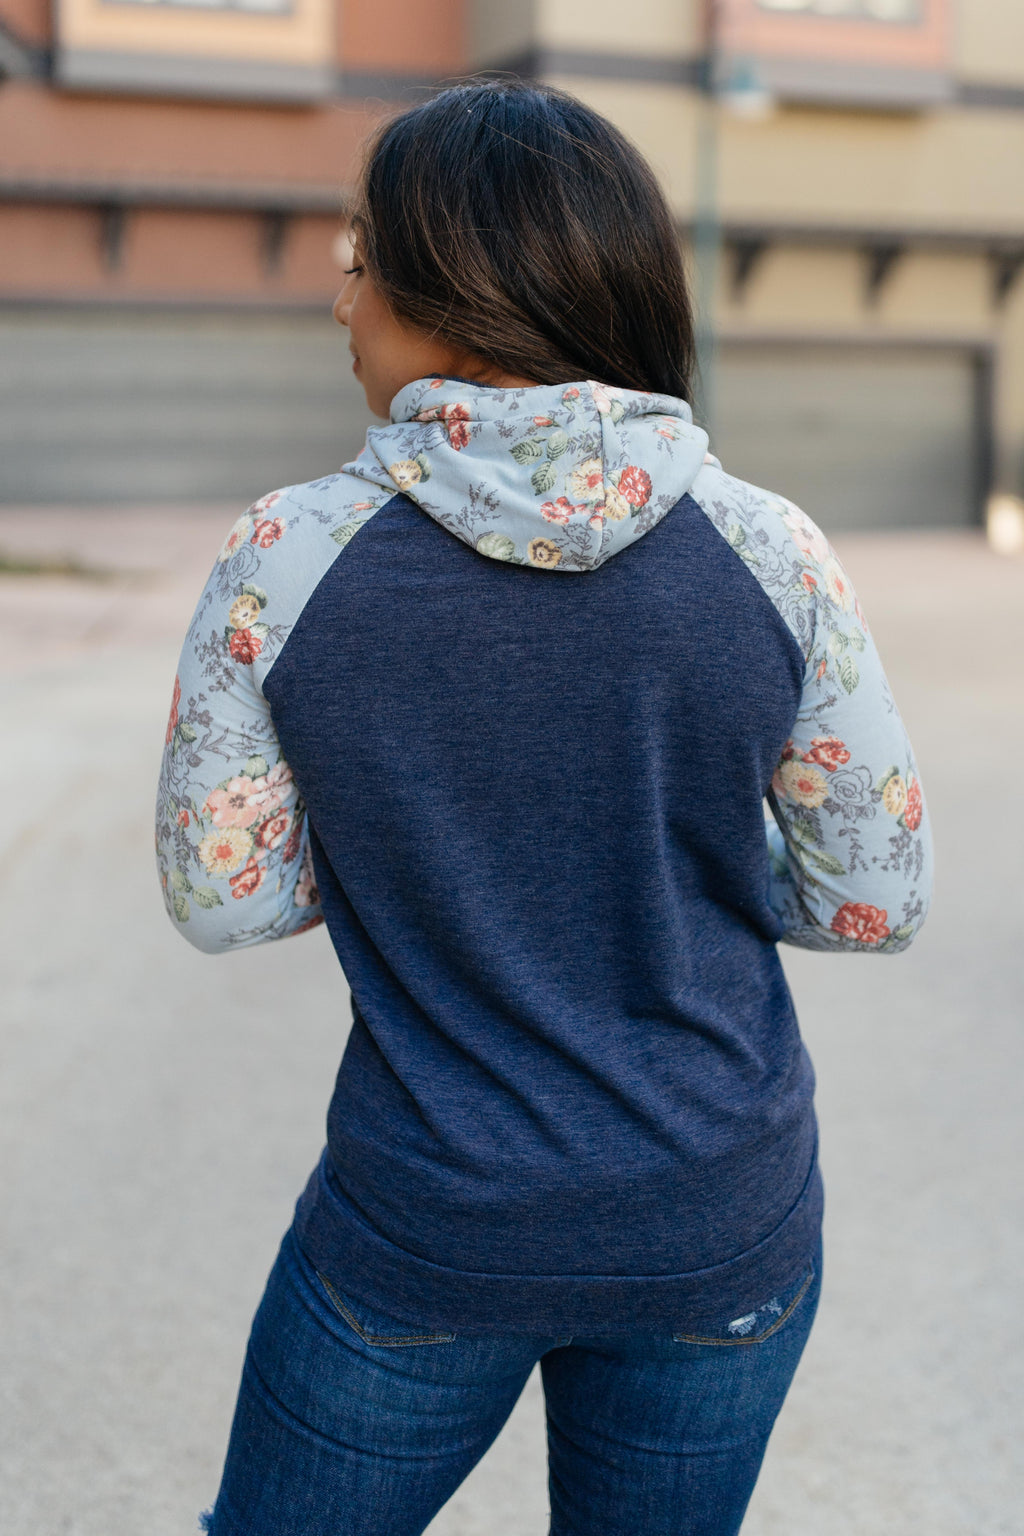 Bits Of Floral And A Zipper Hoodie